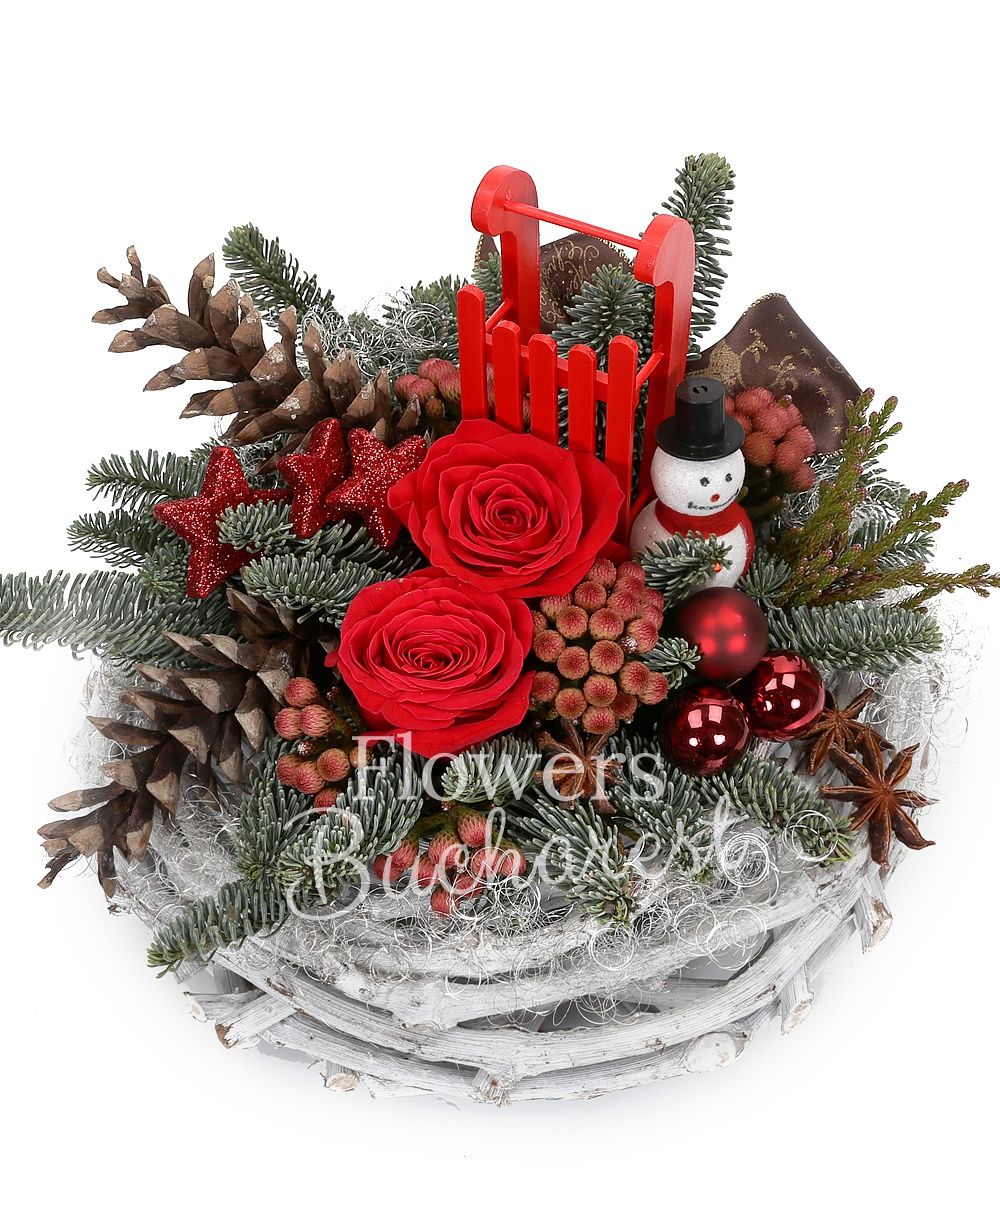 2 red roses, 5 brunia, silver fir, christmas decorations, basket